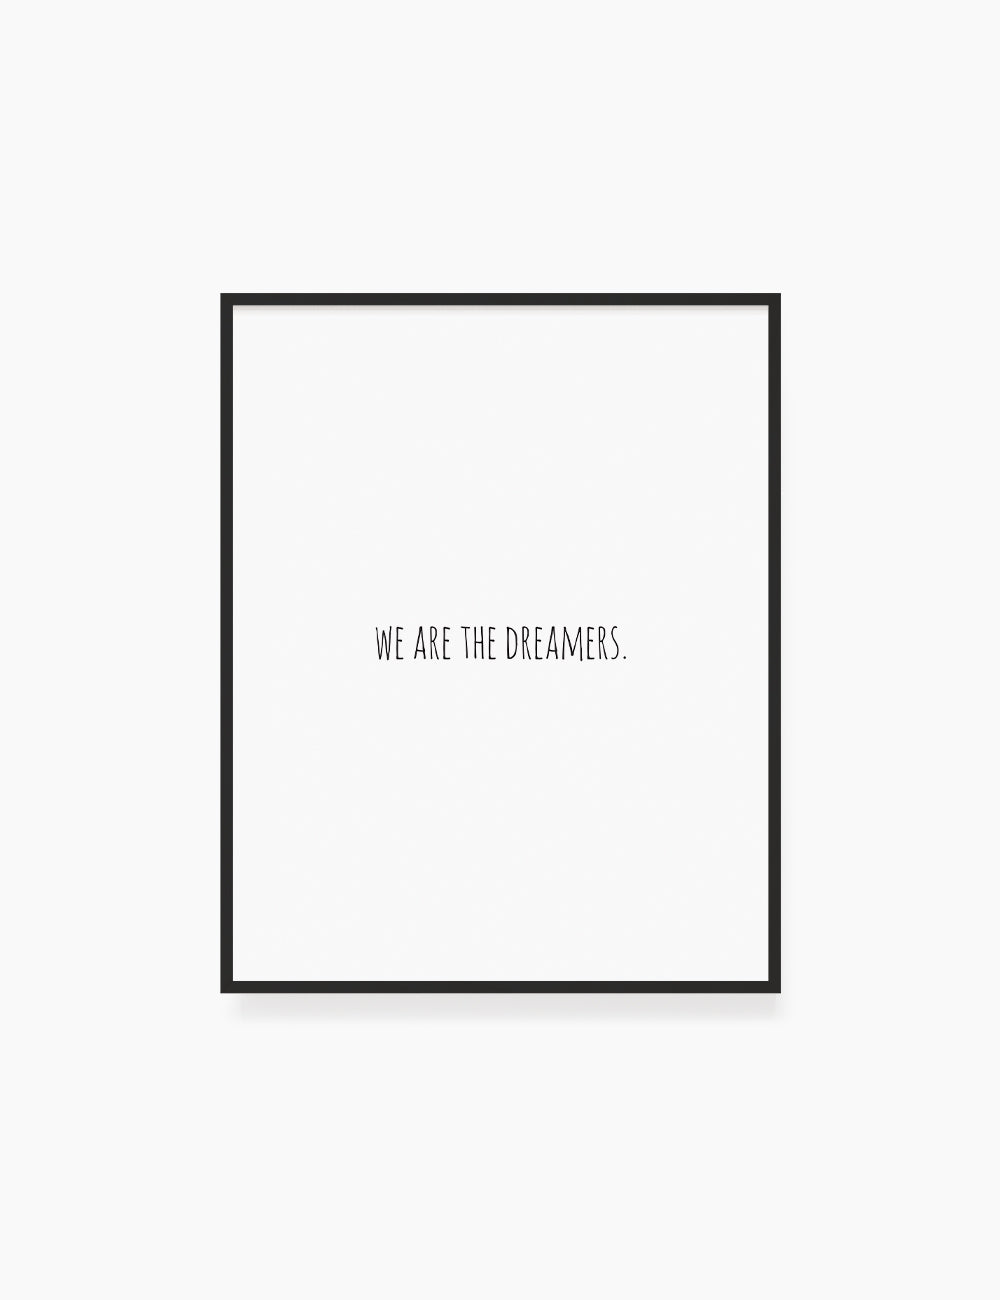 Printable Wall Art Quote: WE ARE THE DREAMERS. Printable Poster. Inspirational Quote. Motivational Quote. WA020 - Paper Moon Art & Design